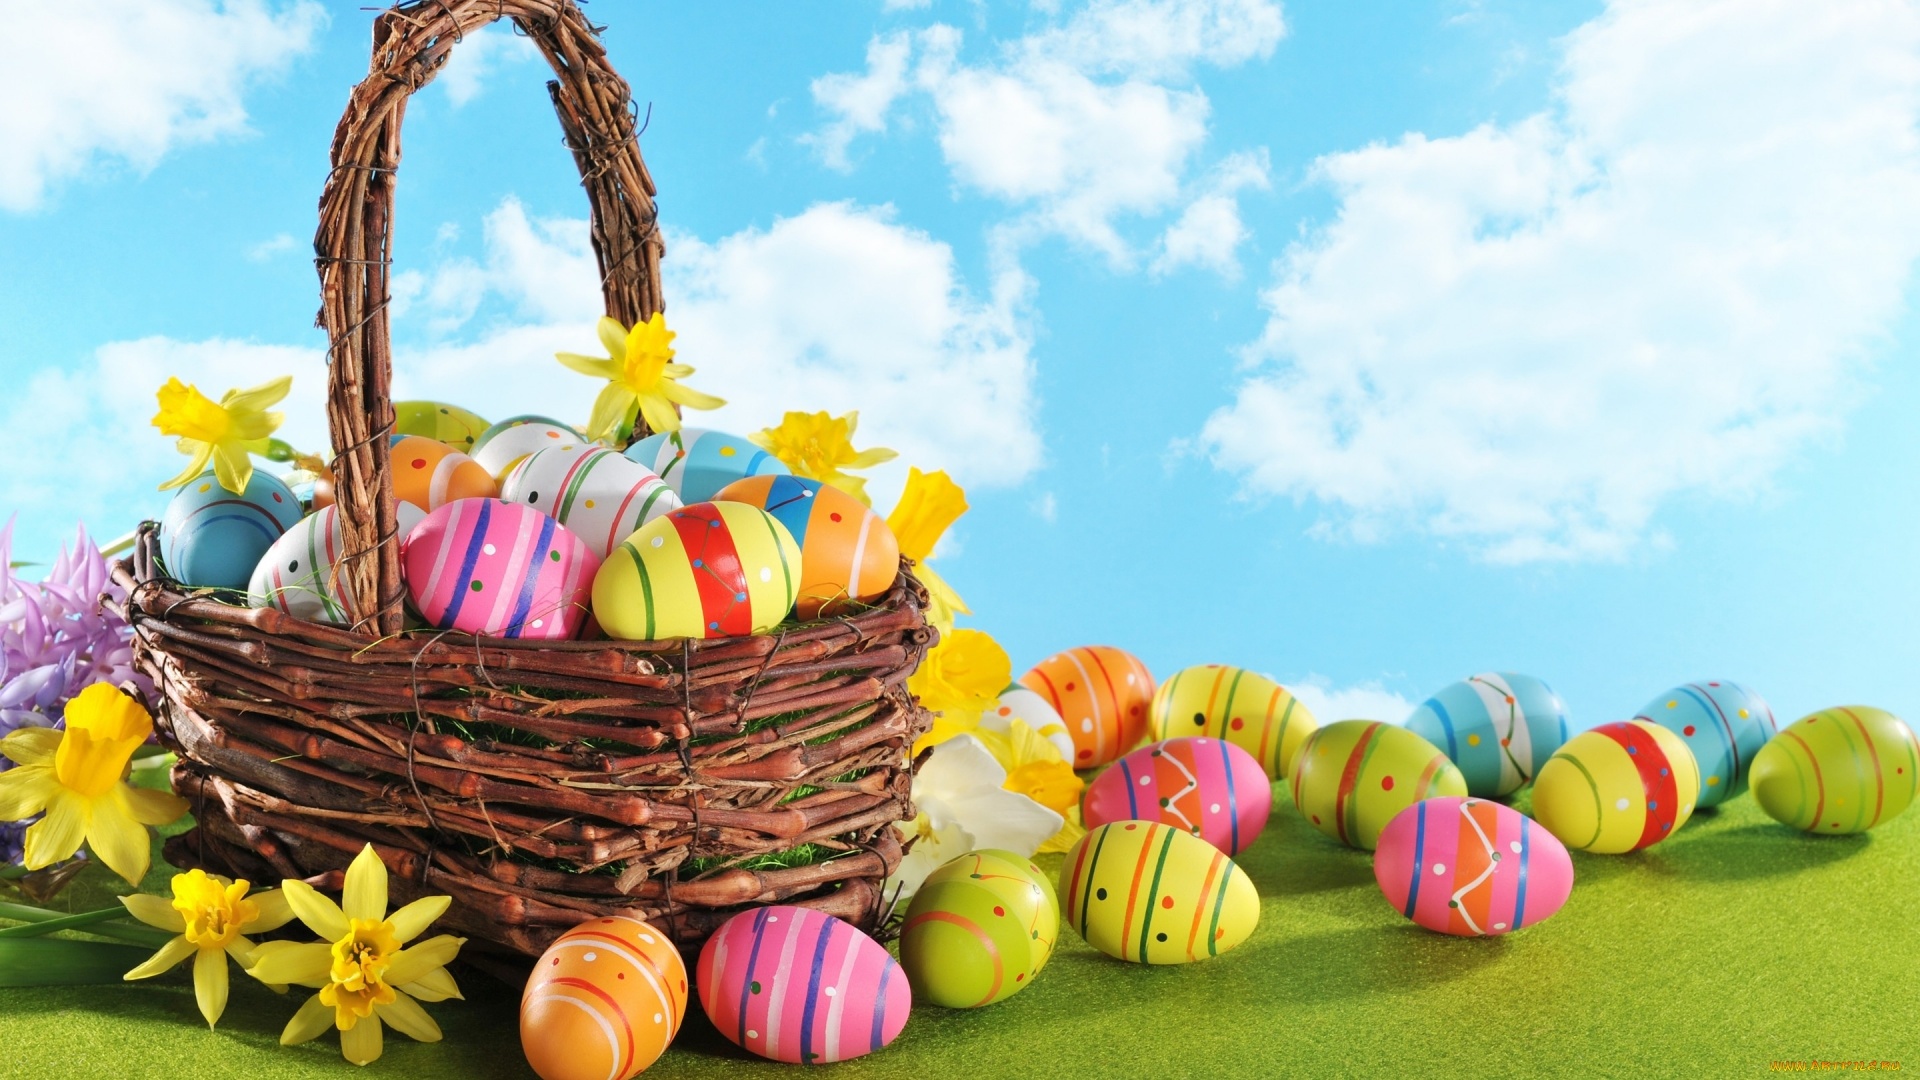 Easter Eggs In A Basket Pic